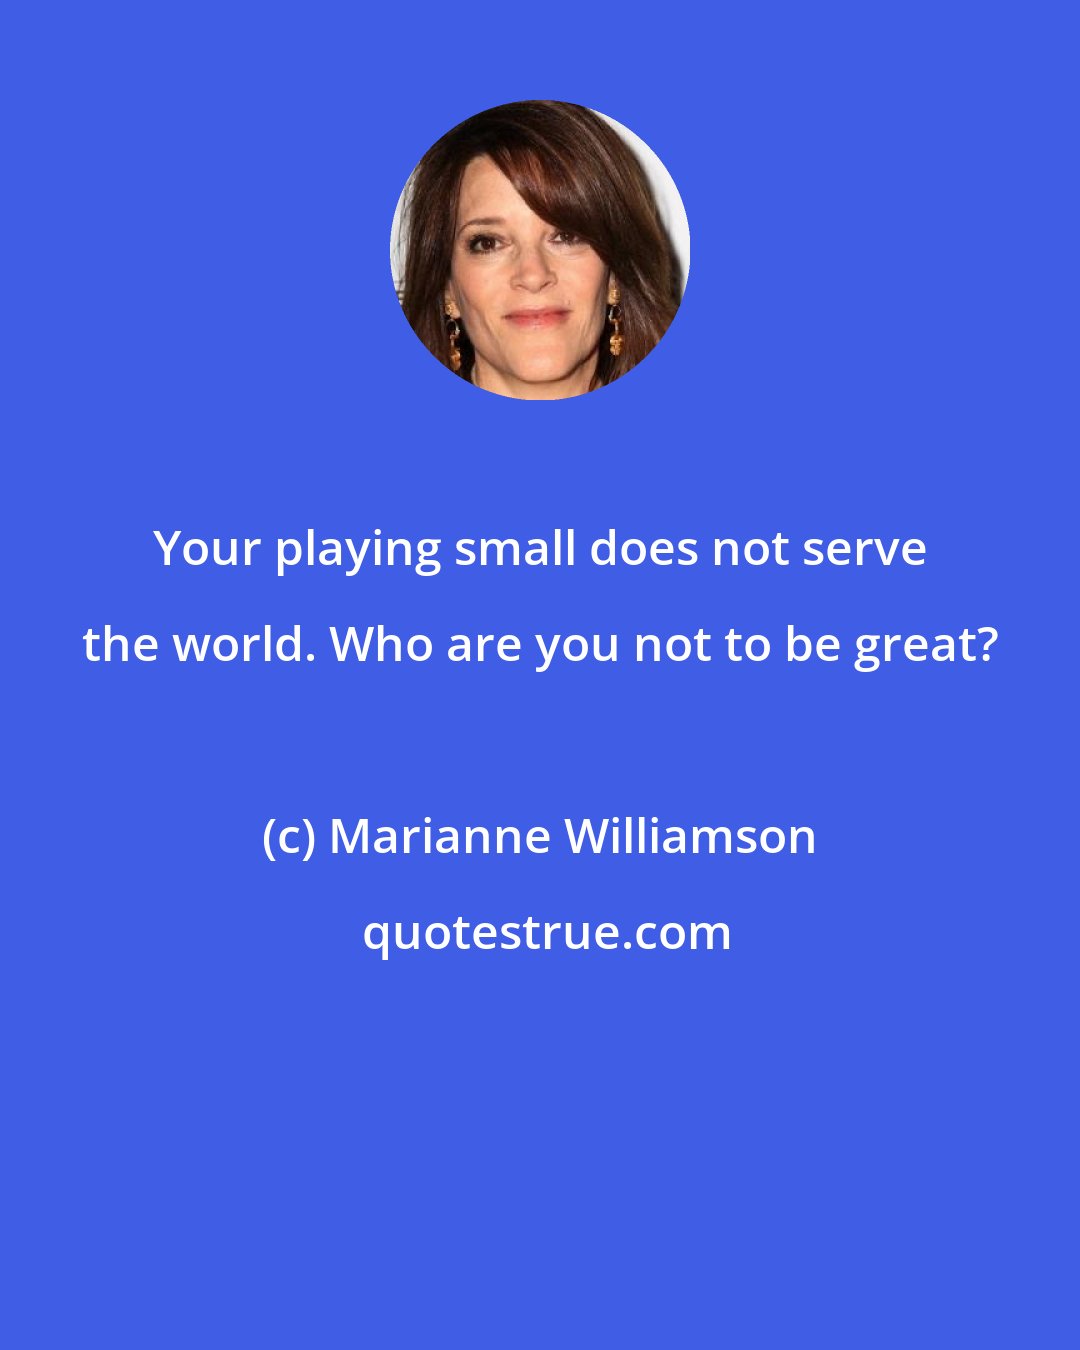 Marianne Williamson: Your playing small does not serve the world. Who are you not to be great?